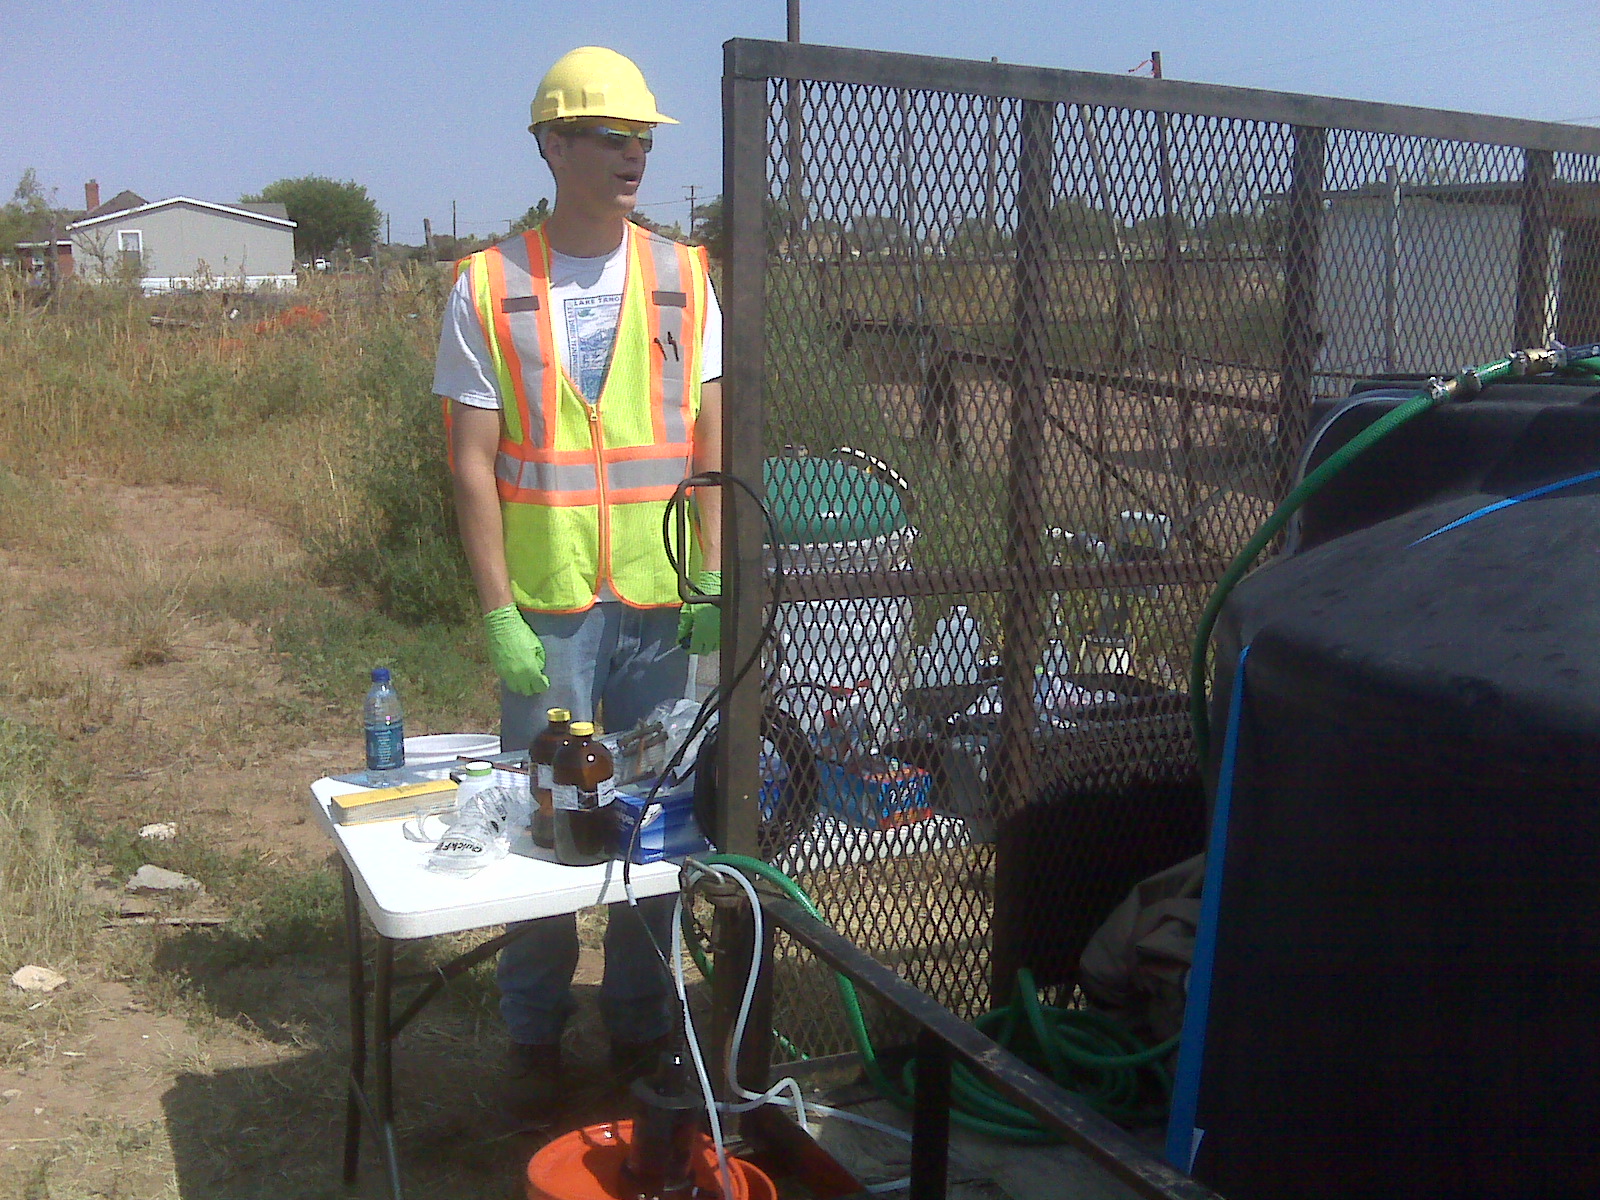 HydroFocus personnel have extensive experience collecting water quality samples from domestic, municpal-supply and monitoring wells.